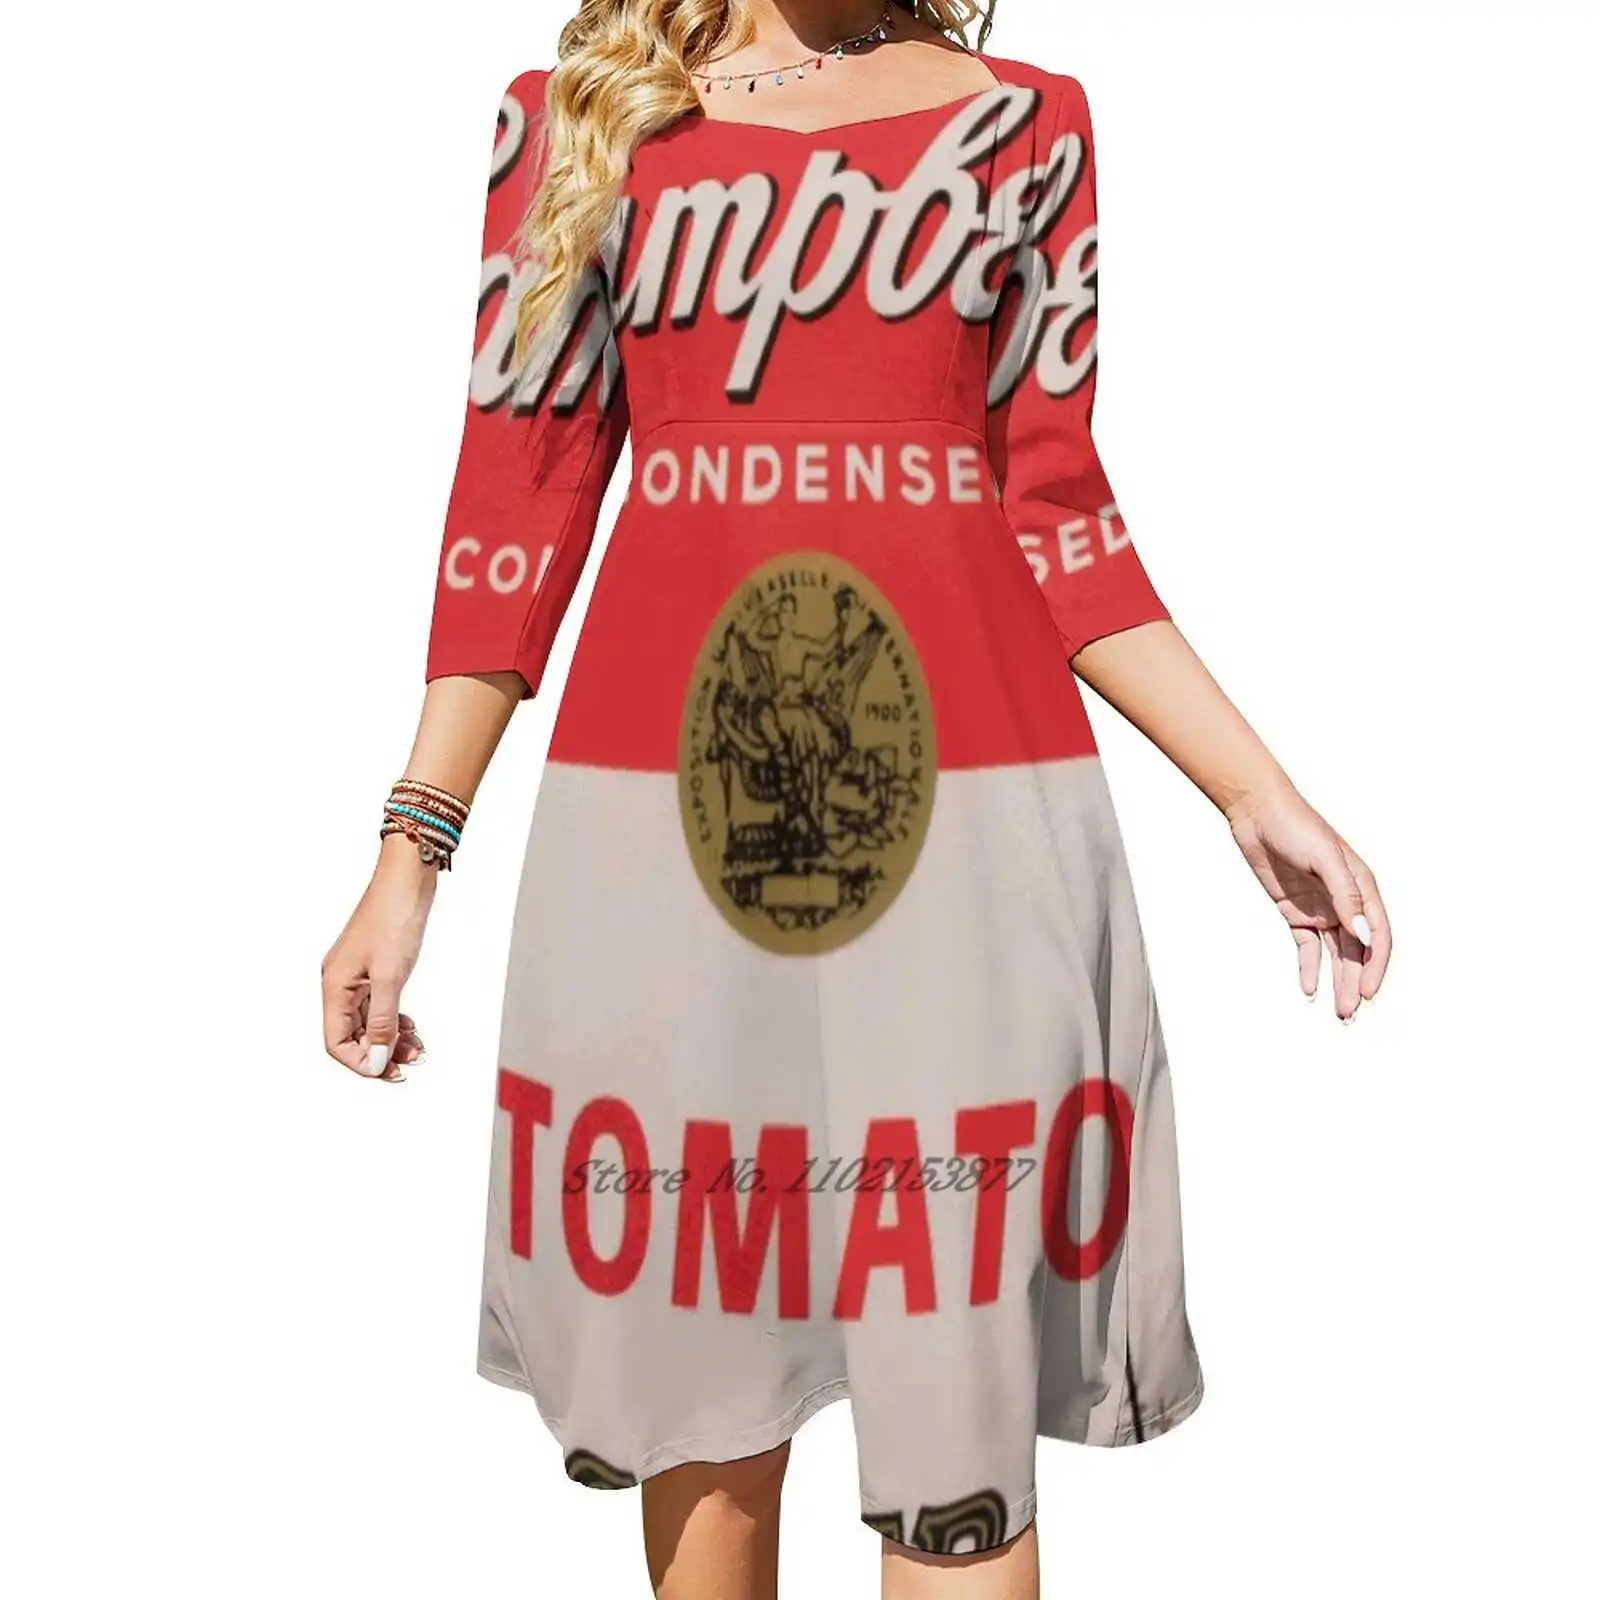 Tomato Soup Print Loose Pocket Dress Women Casual V Neck Dress Printed Dress Andy Andrew Warhol Campbell Soup Tomato Red White images - 6